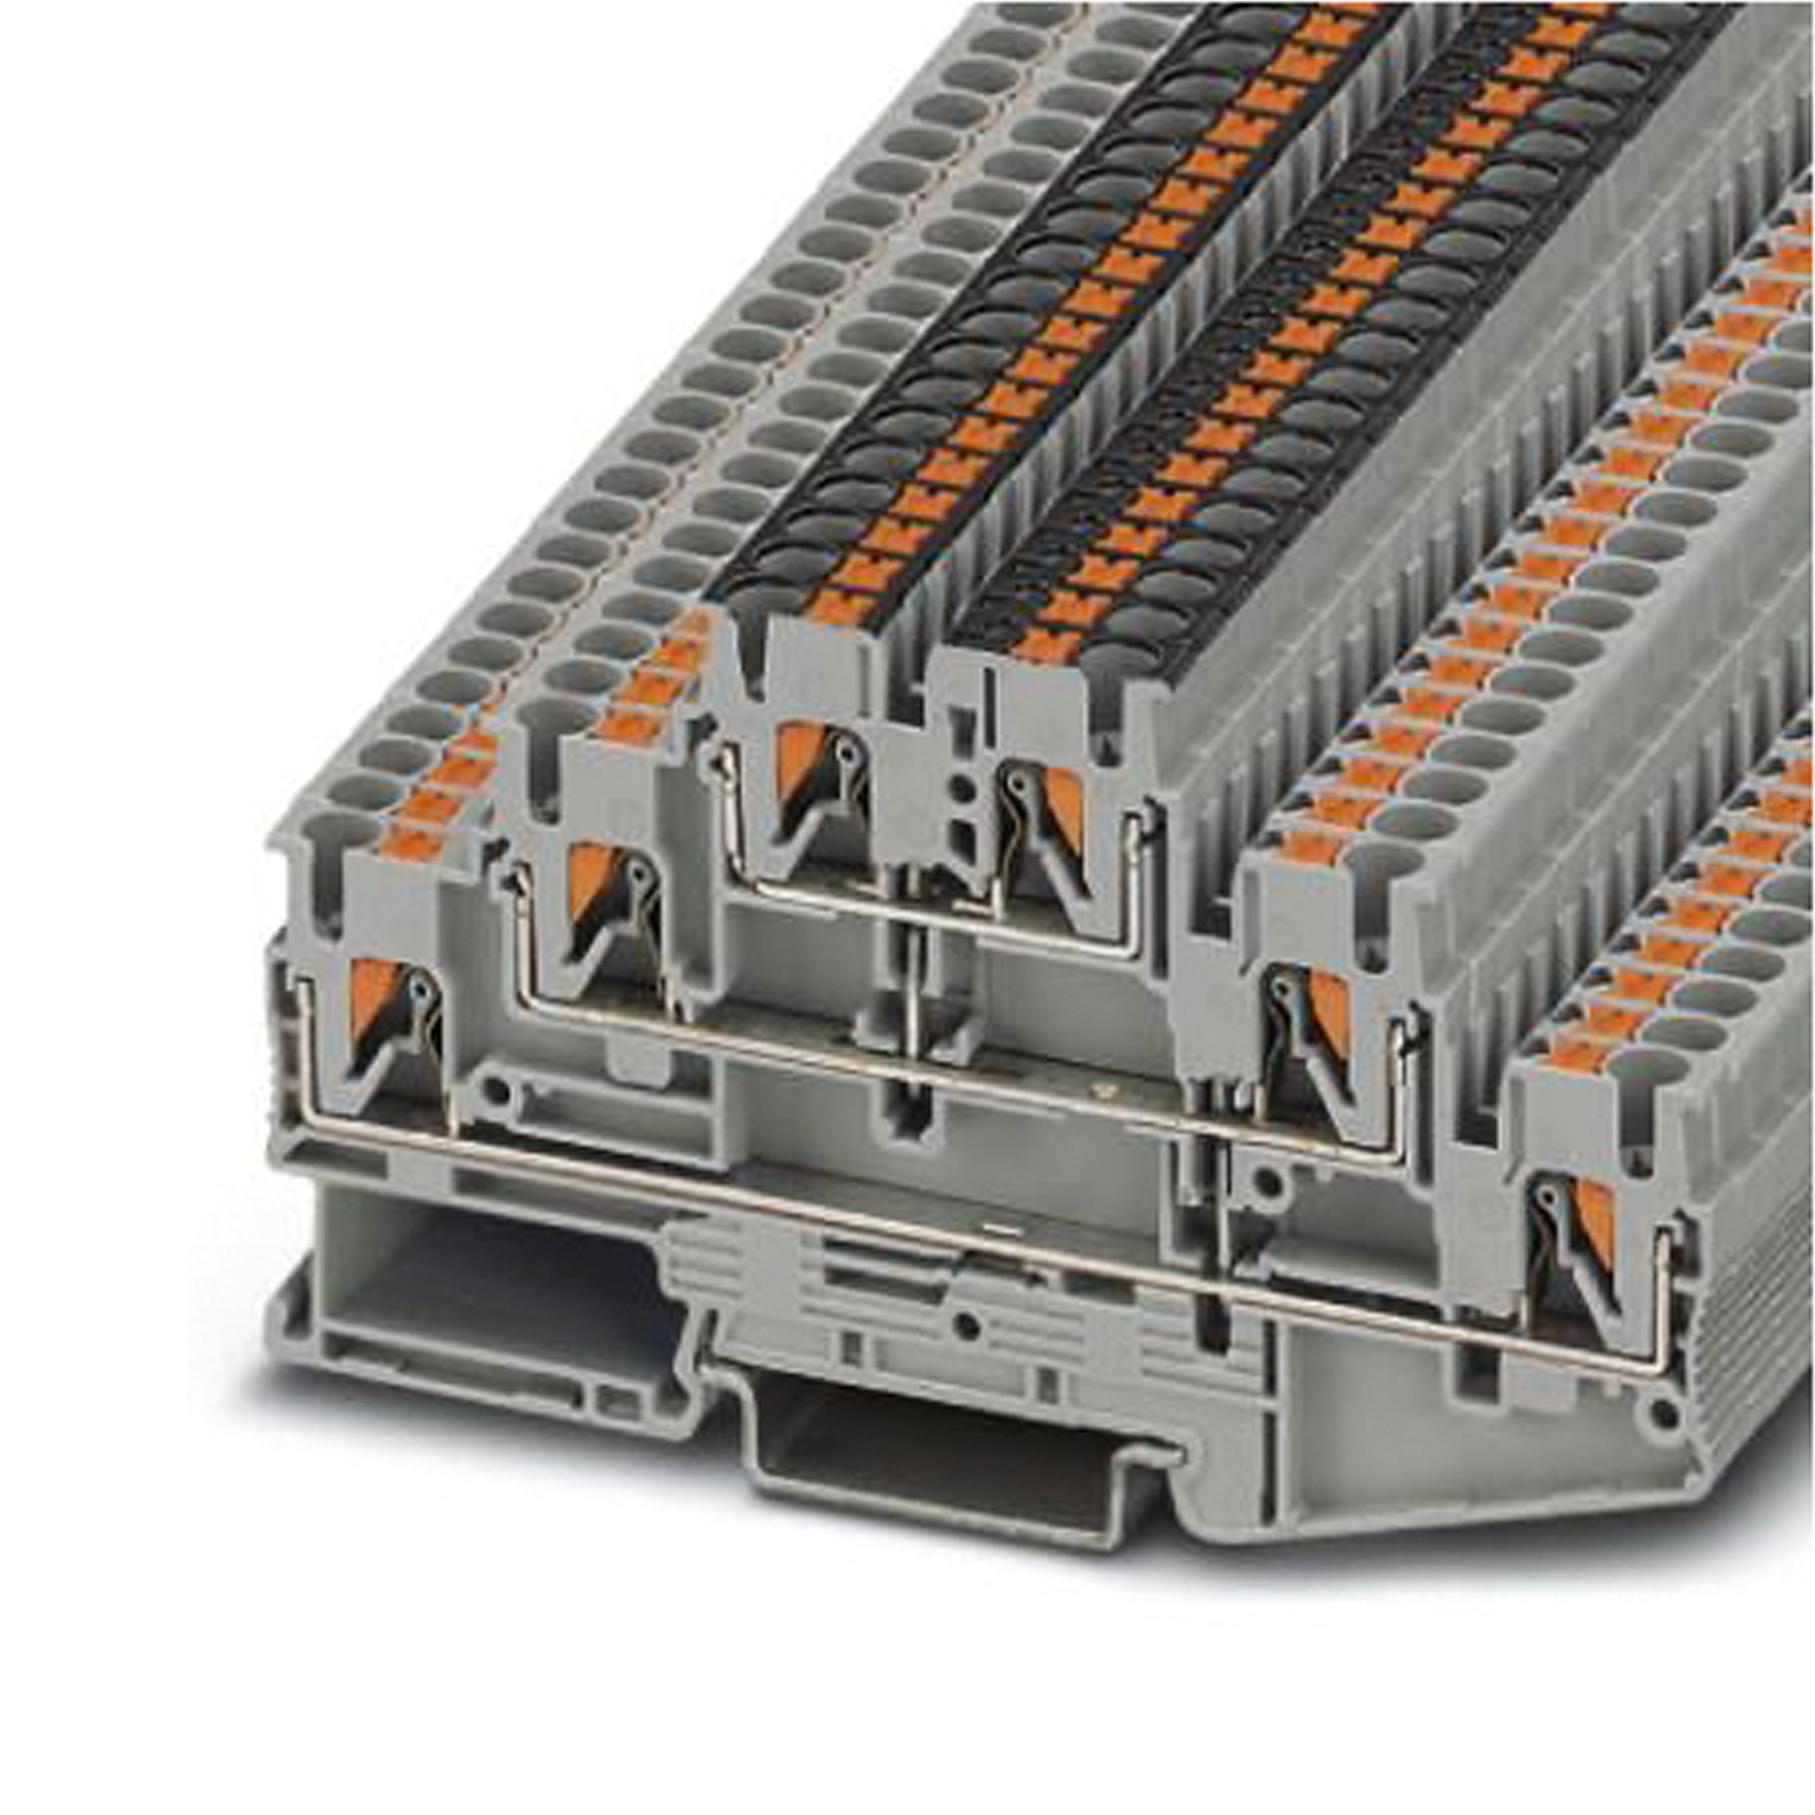 PT 2,5-3PV DINRAIL TERMINAL BLOCK, 6WAY, 12AWG, GRY PHOENIX CONTACT